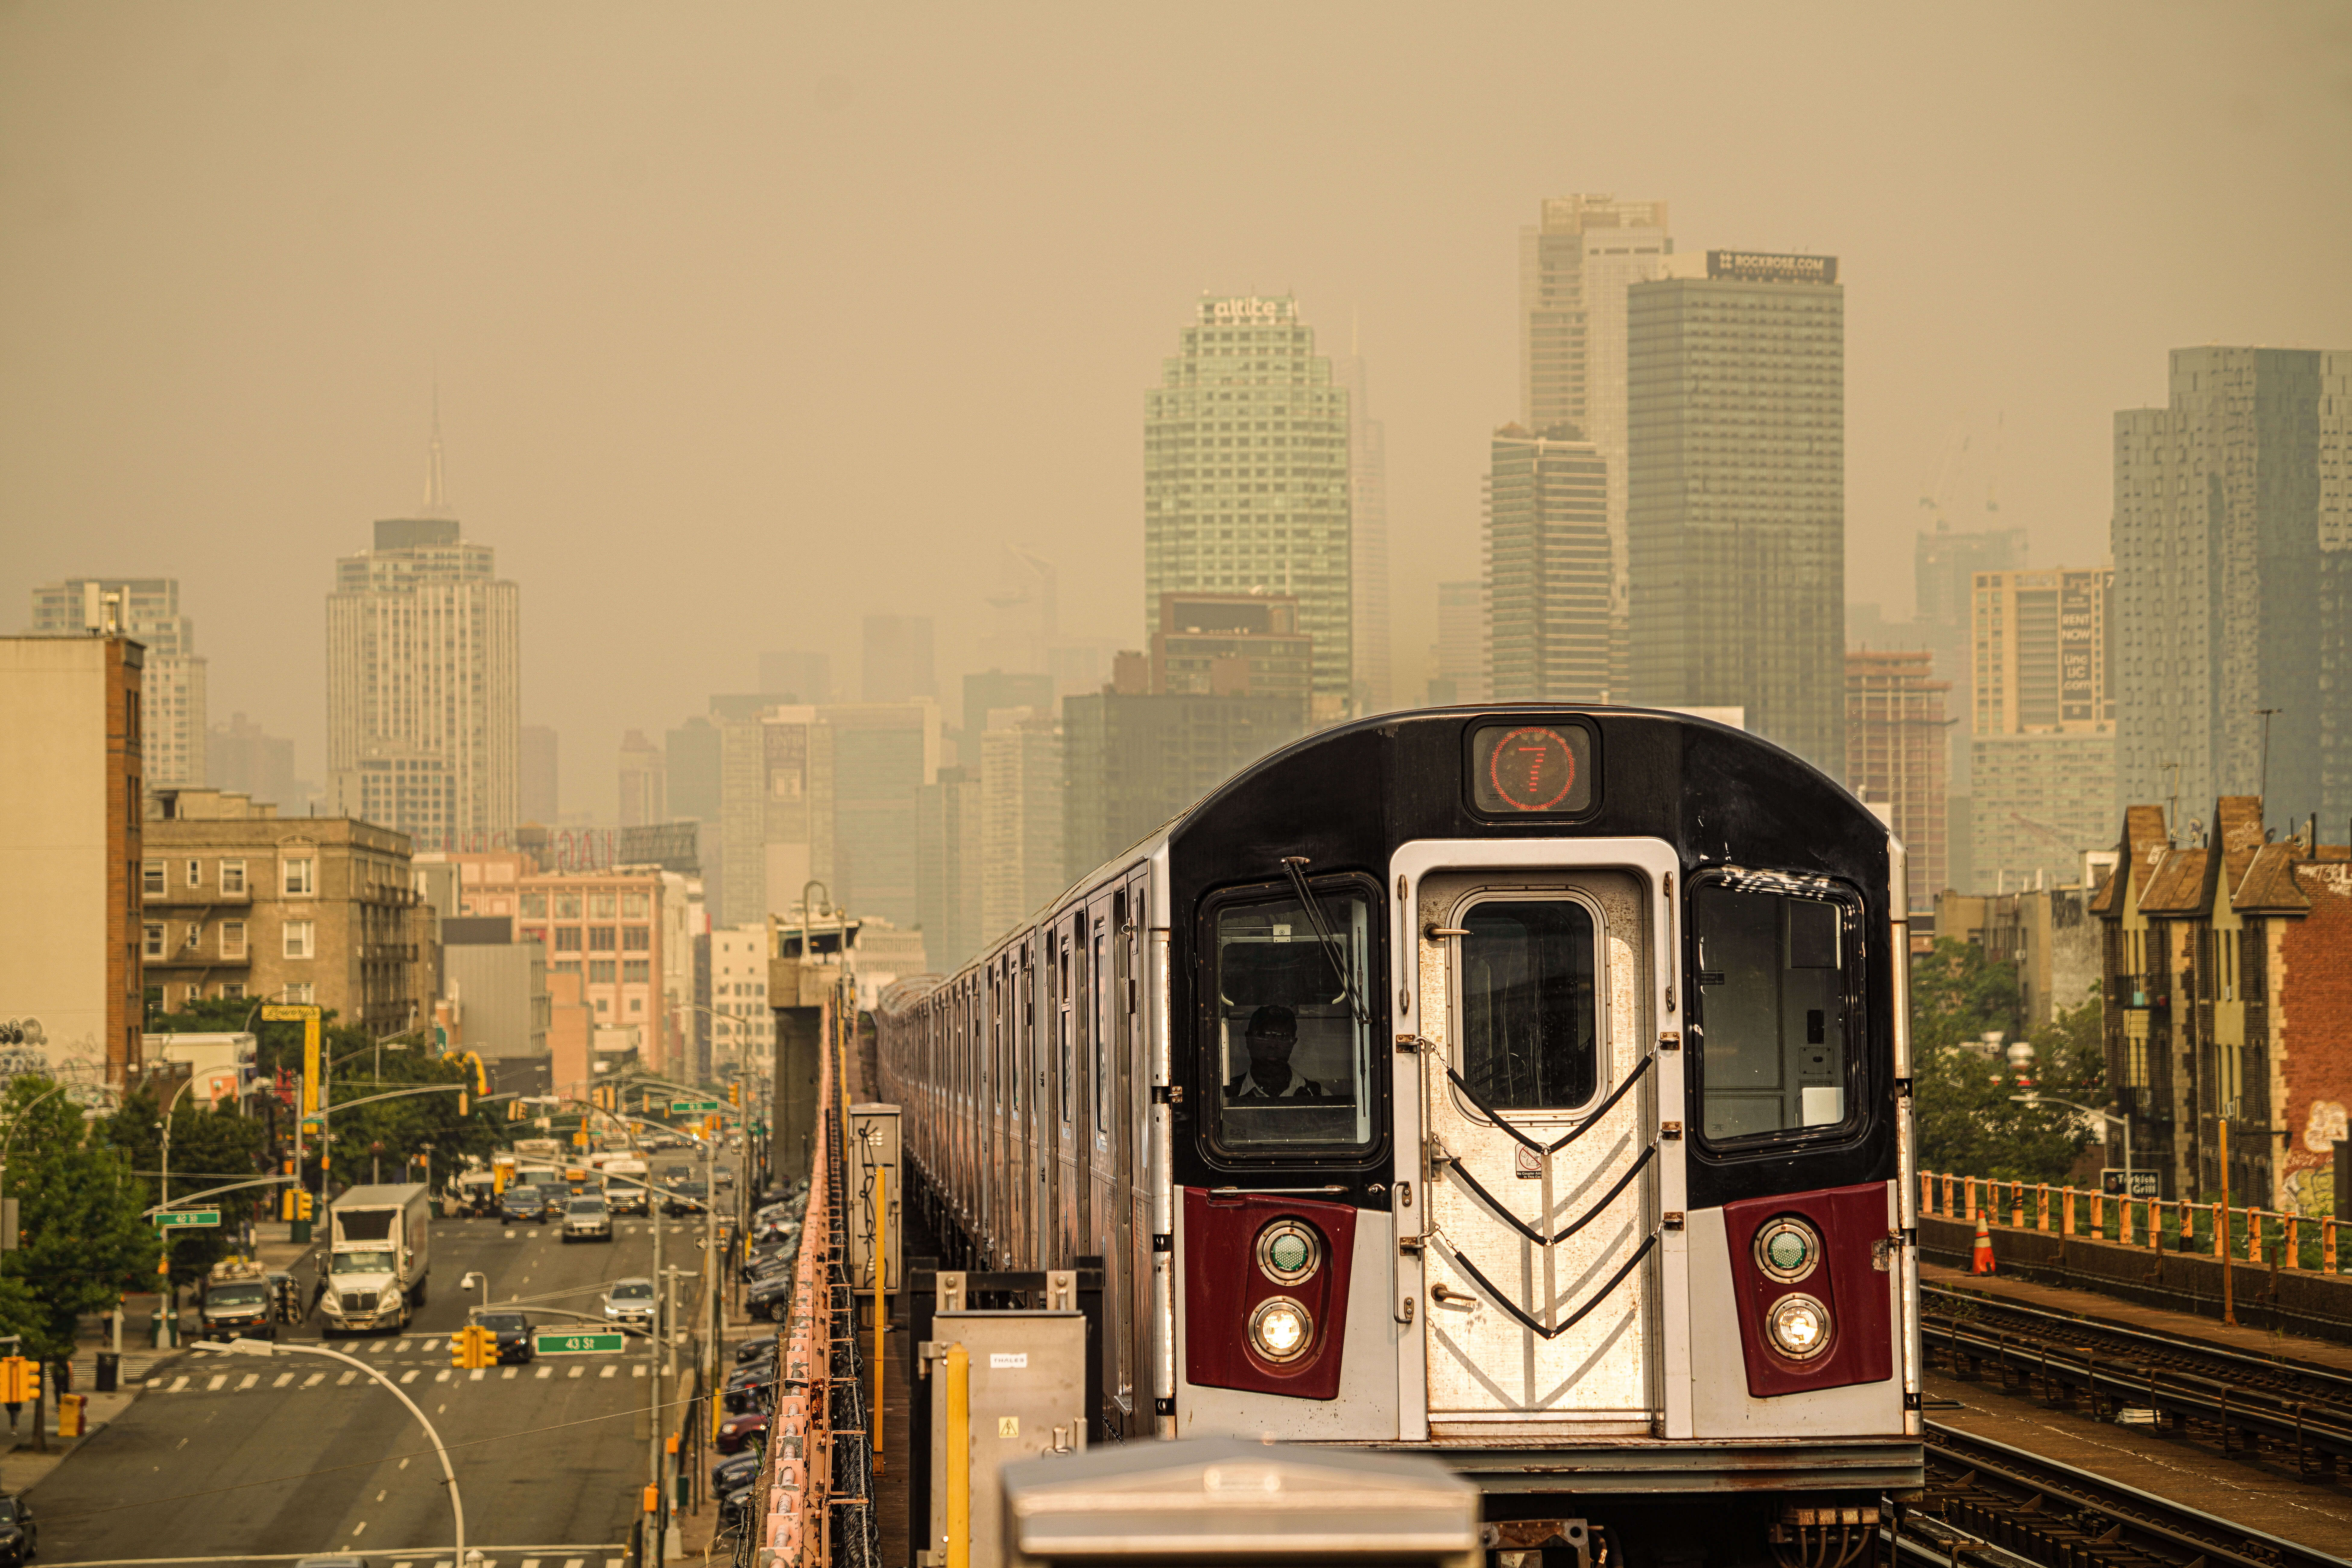 7 train arrives amid smoke filled skies on air quality alert day in Queens